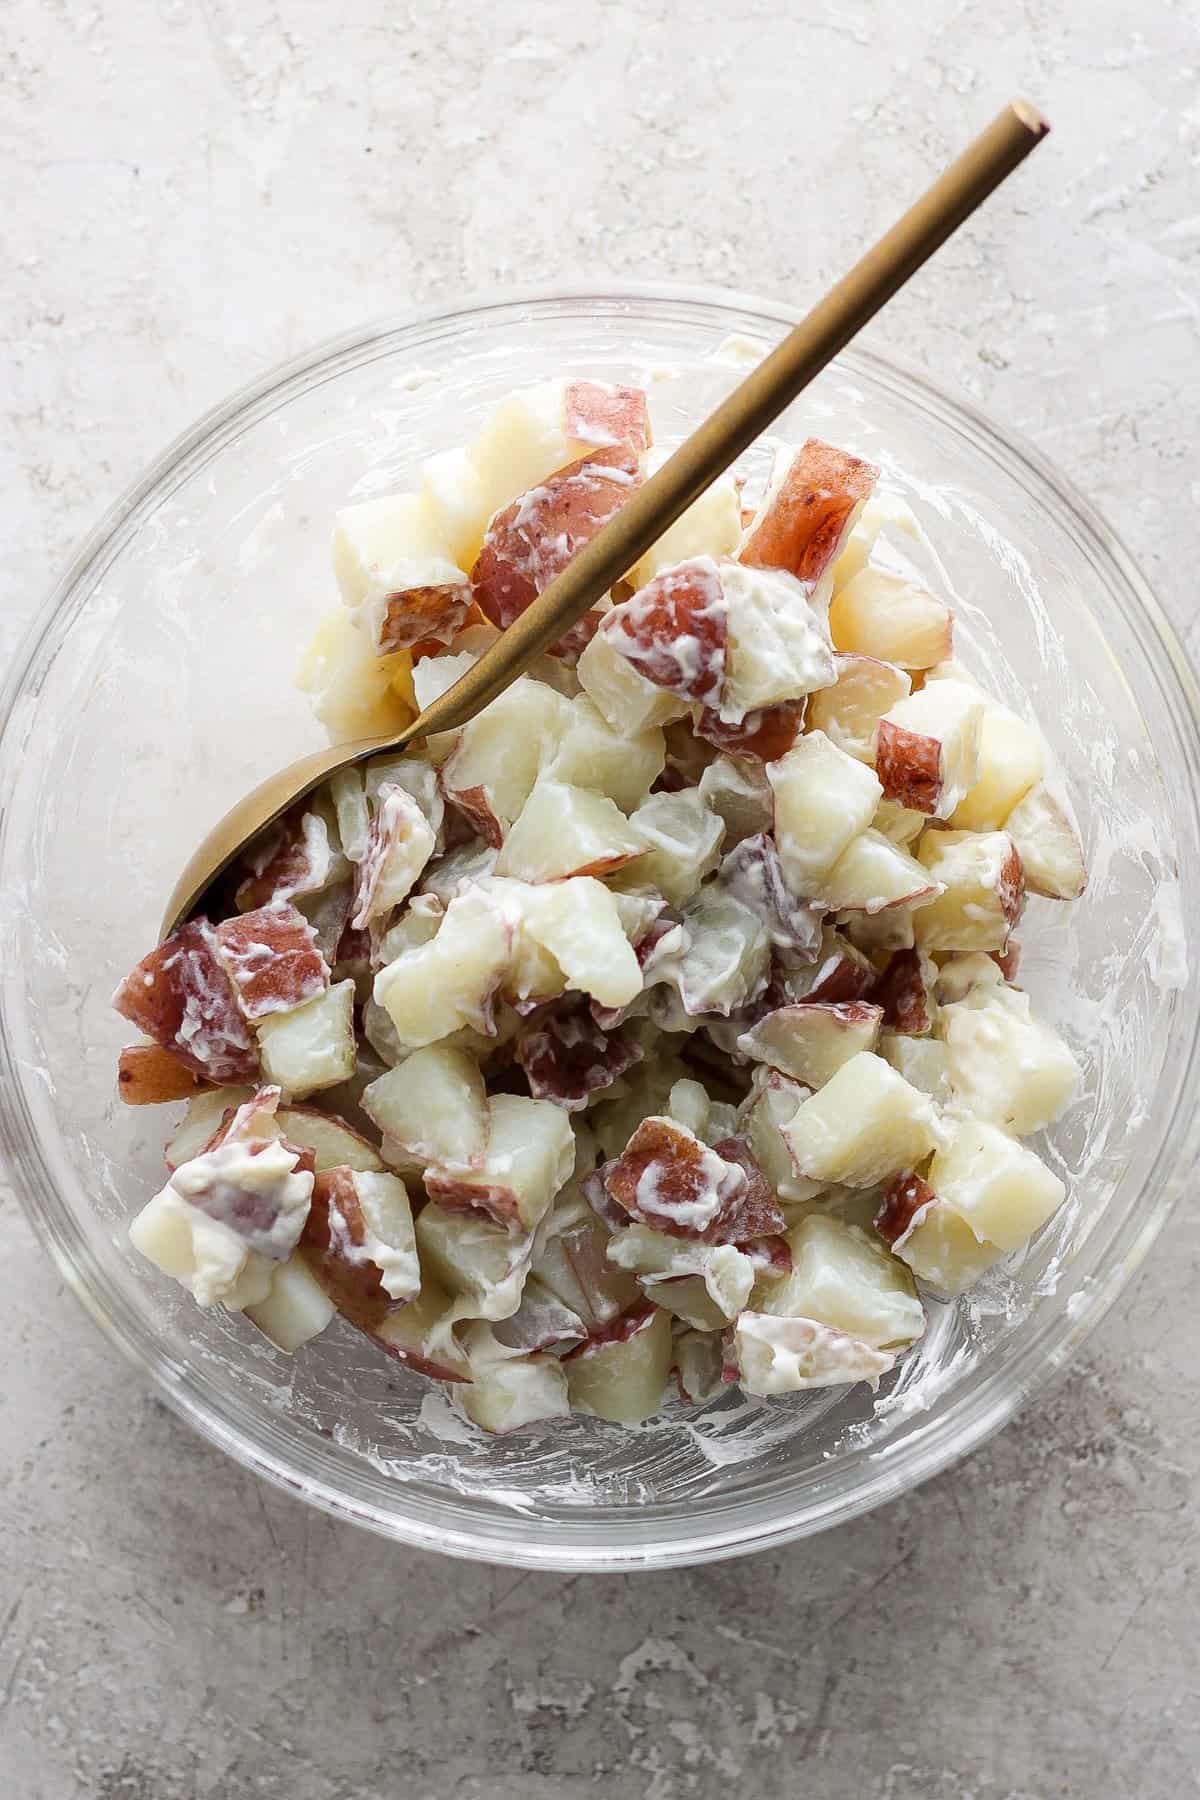 A bowl of potato salad with diced potatoes, creamy dressing, and bits of red onion, served with a wooden spoon on a light stone surface.